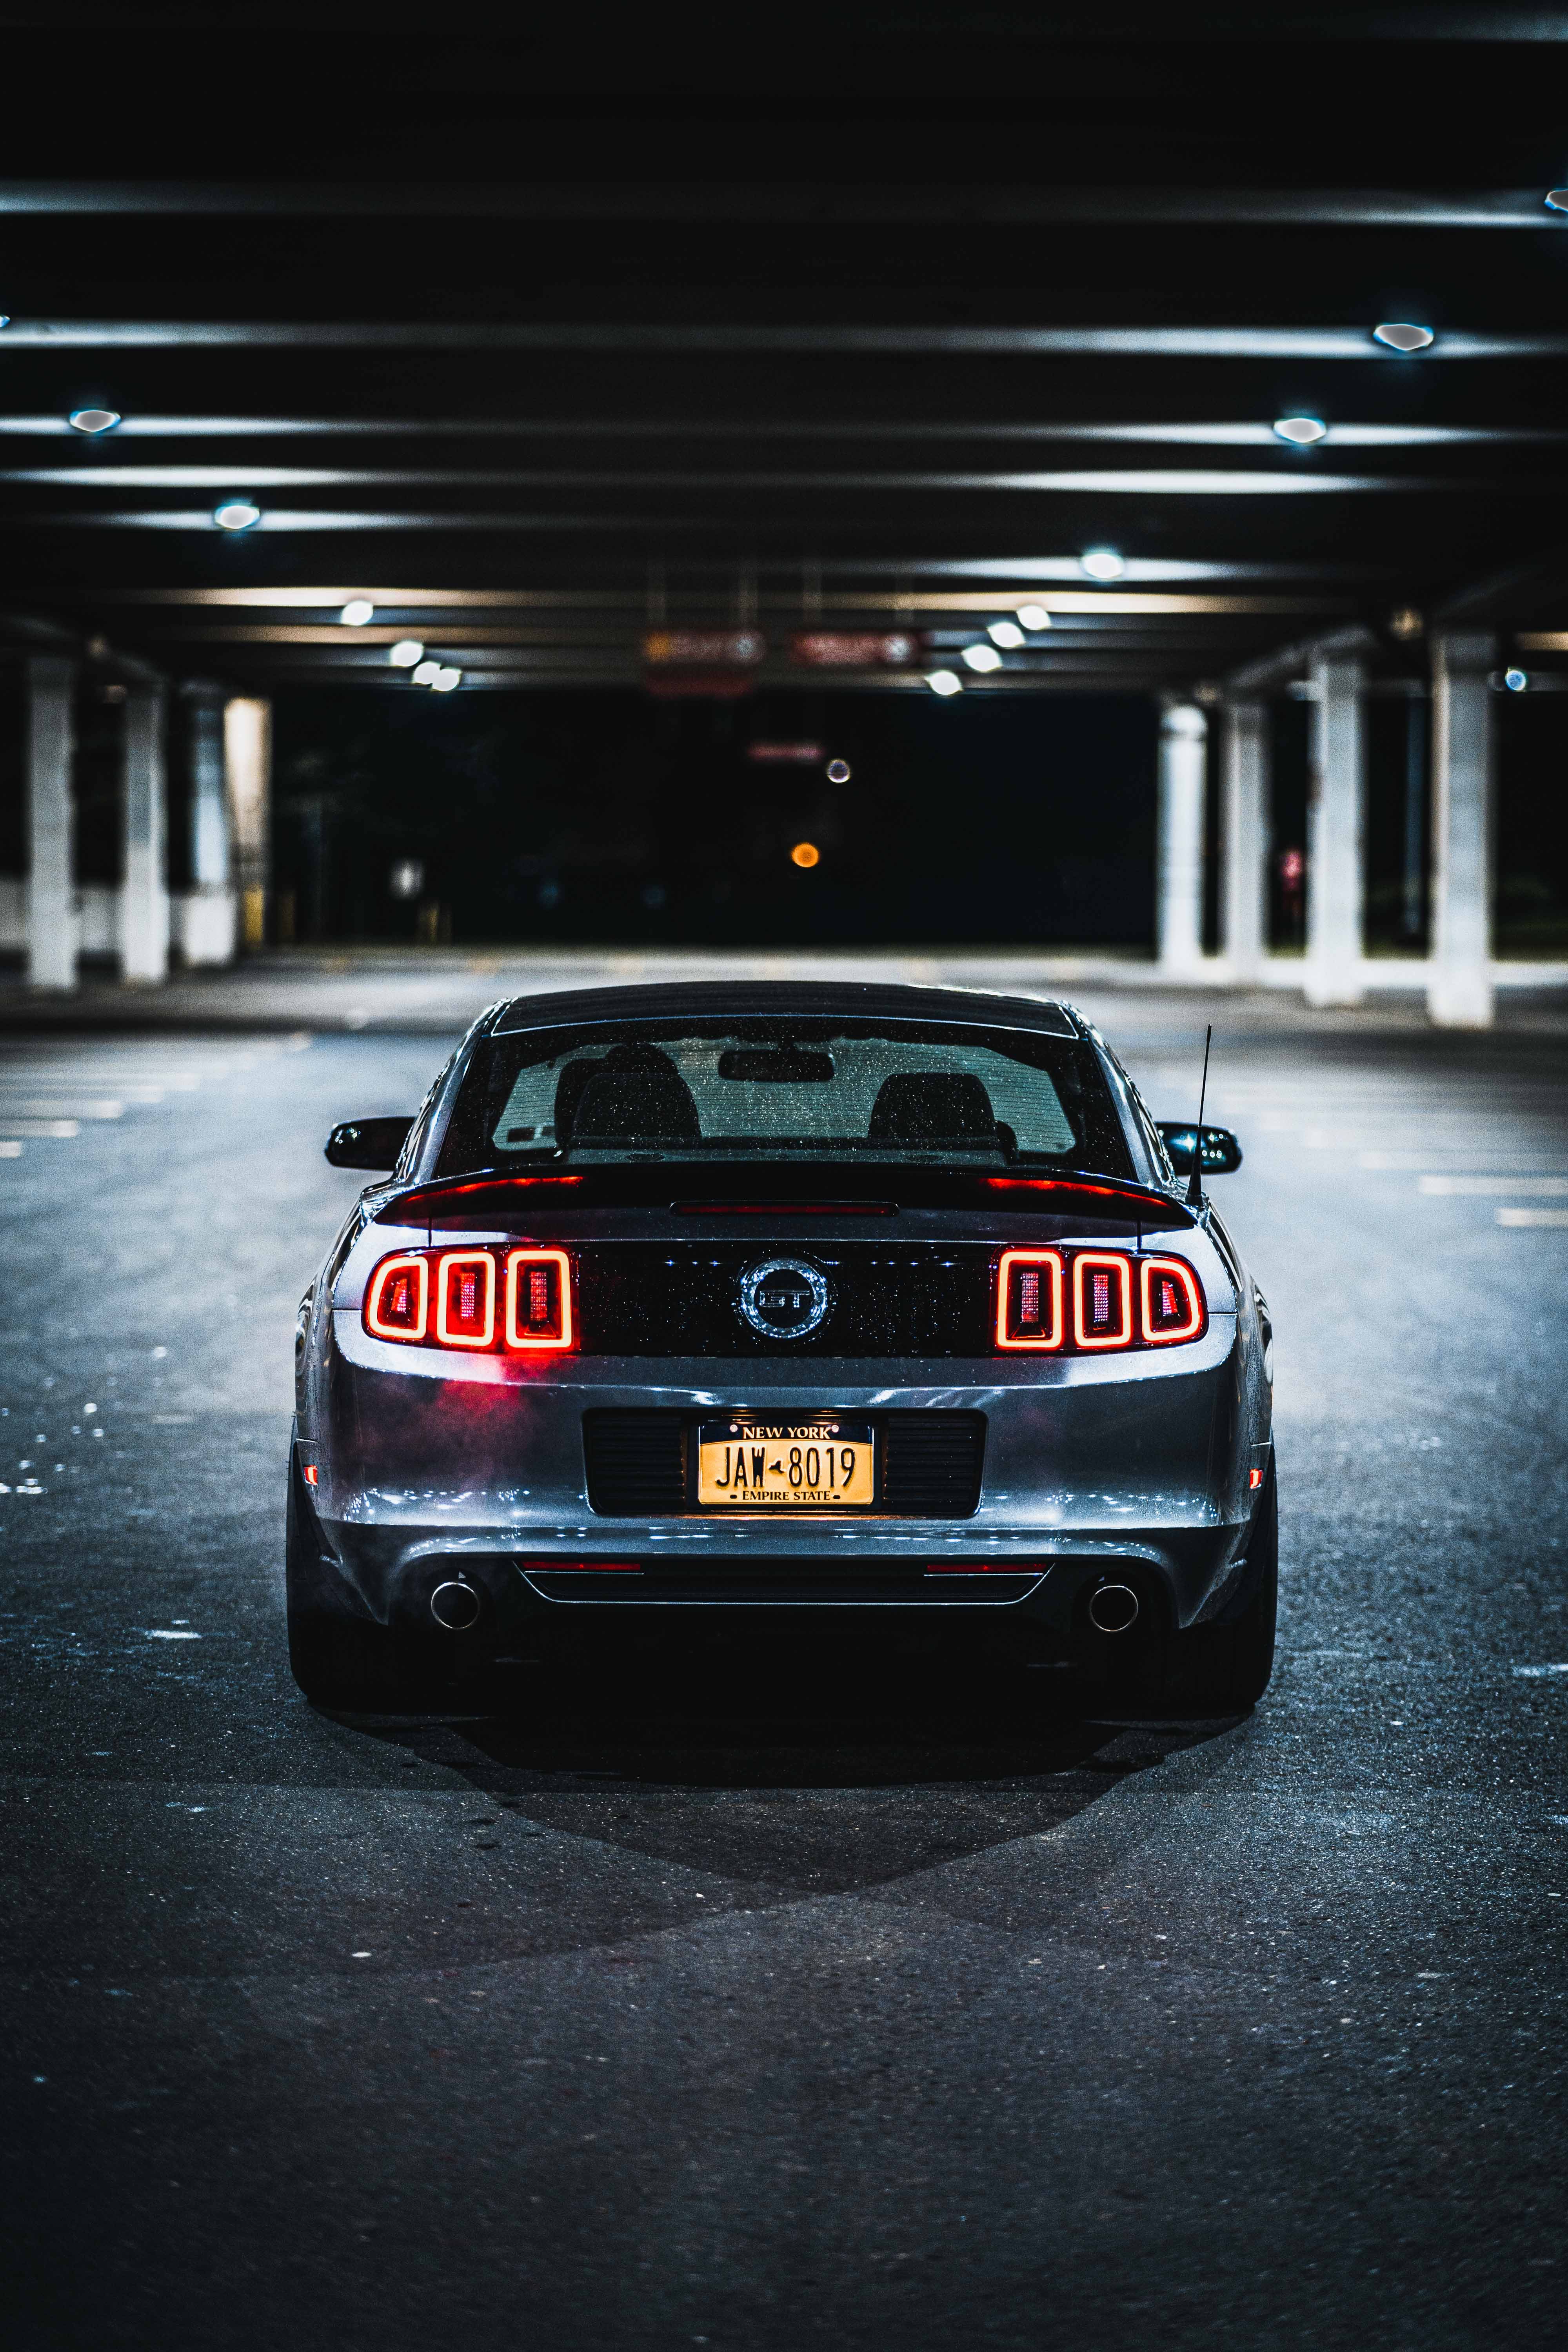 ford mustang, cars, lights, back view, rear view, headlights, ford mustang gt